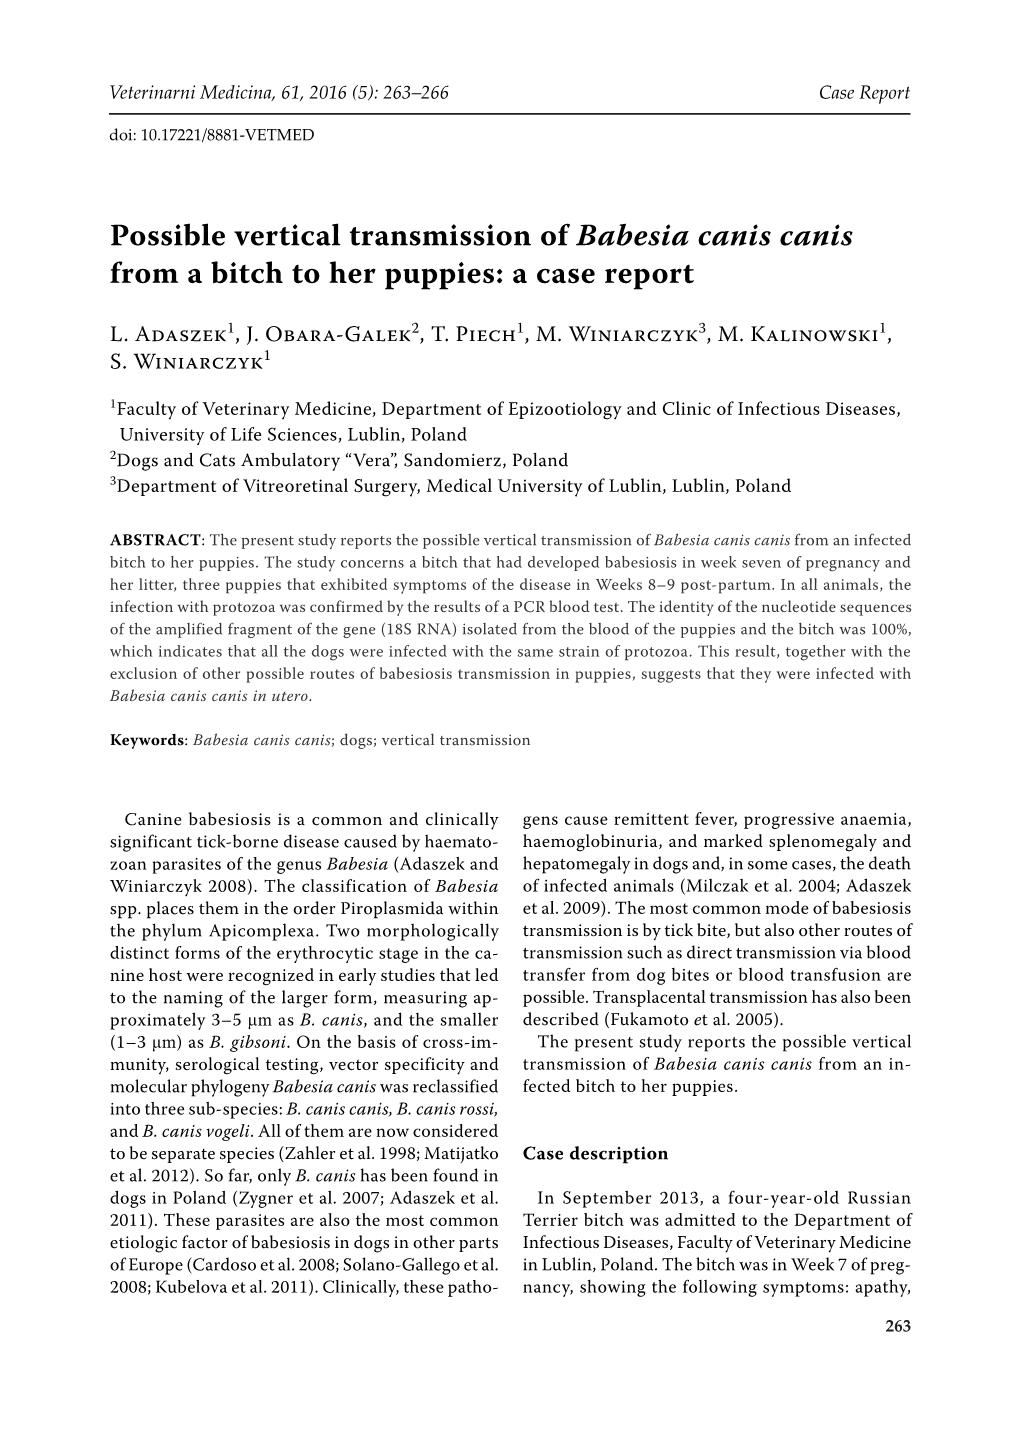 Possible Vertical Transmission of Babesia Canis Canis from a Bitch to Her Puppies: a Case Report